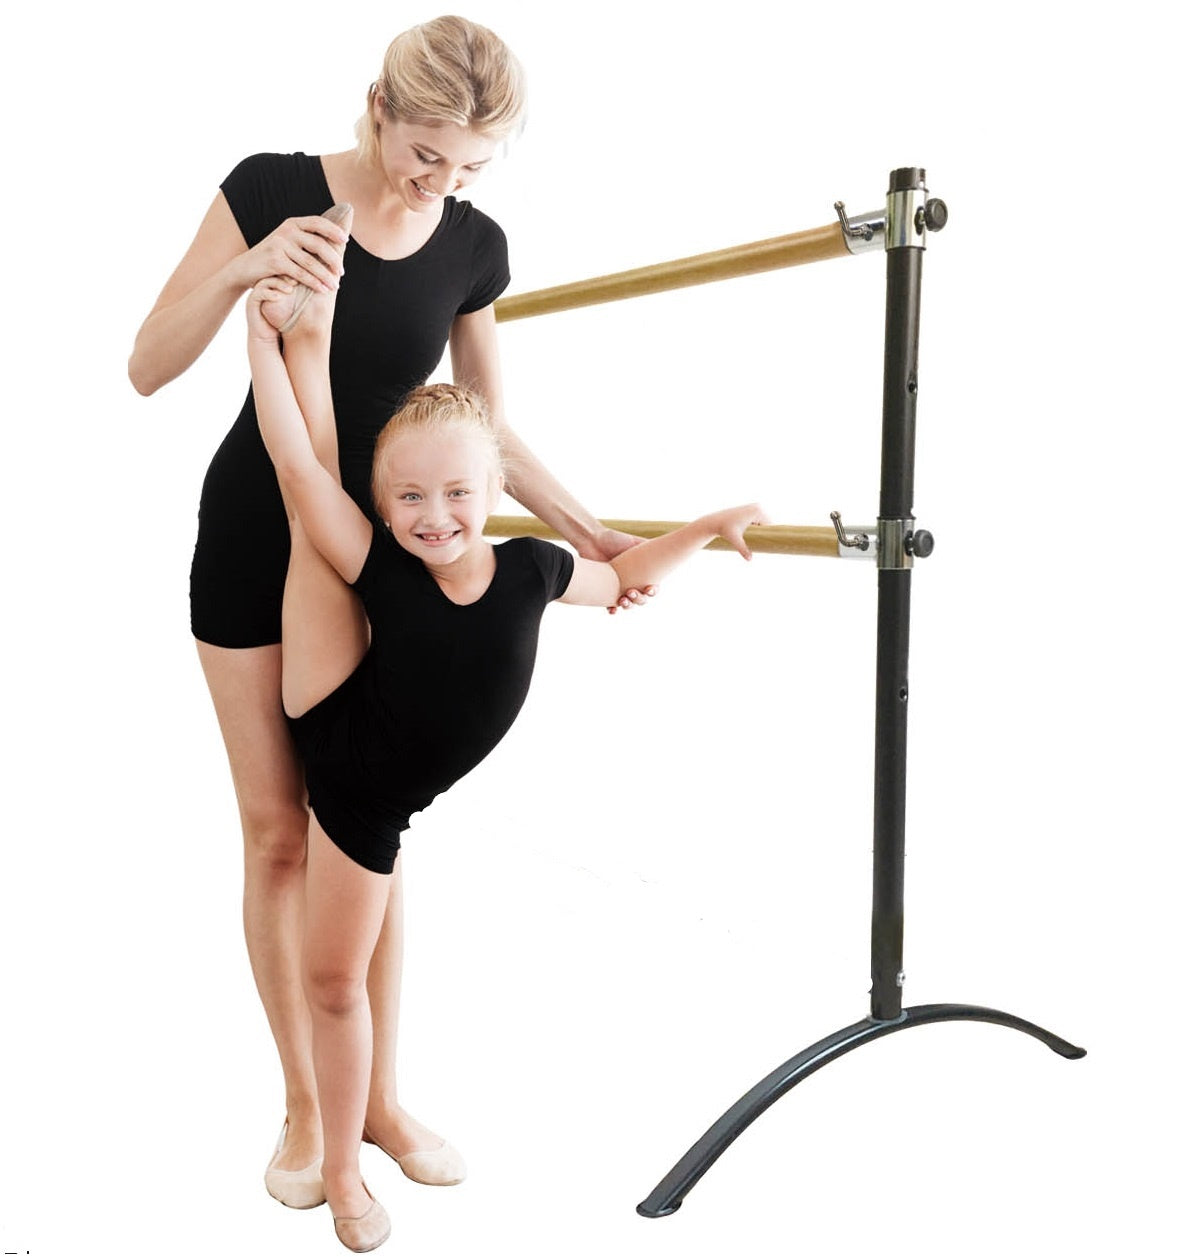 Artan Balance Ballet Barre Portable for Home or Studio, Adjustable Bar for  Stretch, Pilates, Dance or Active Workouts, Single or Double, Kids and  Adults (Curved Leg Double Bar 4 FT) in Dubai 